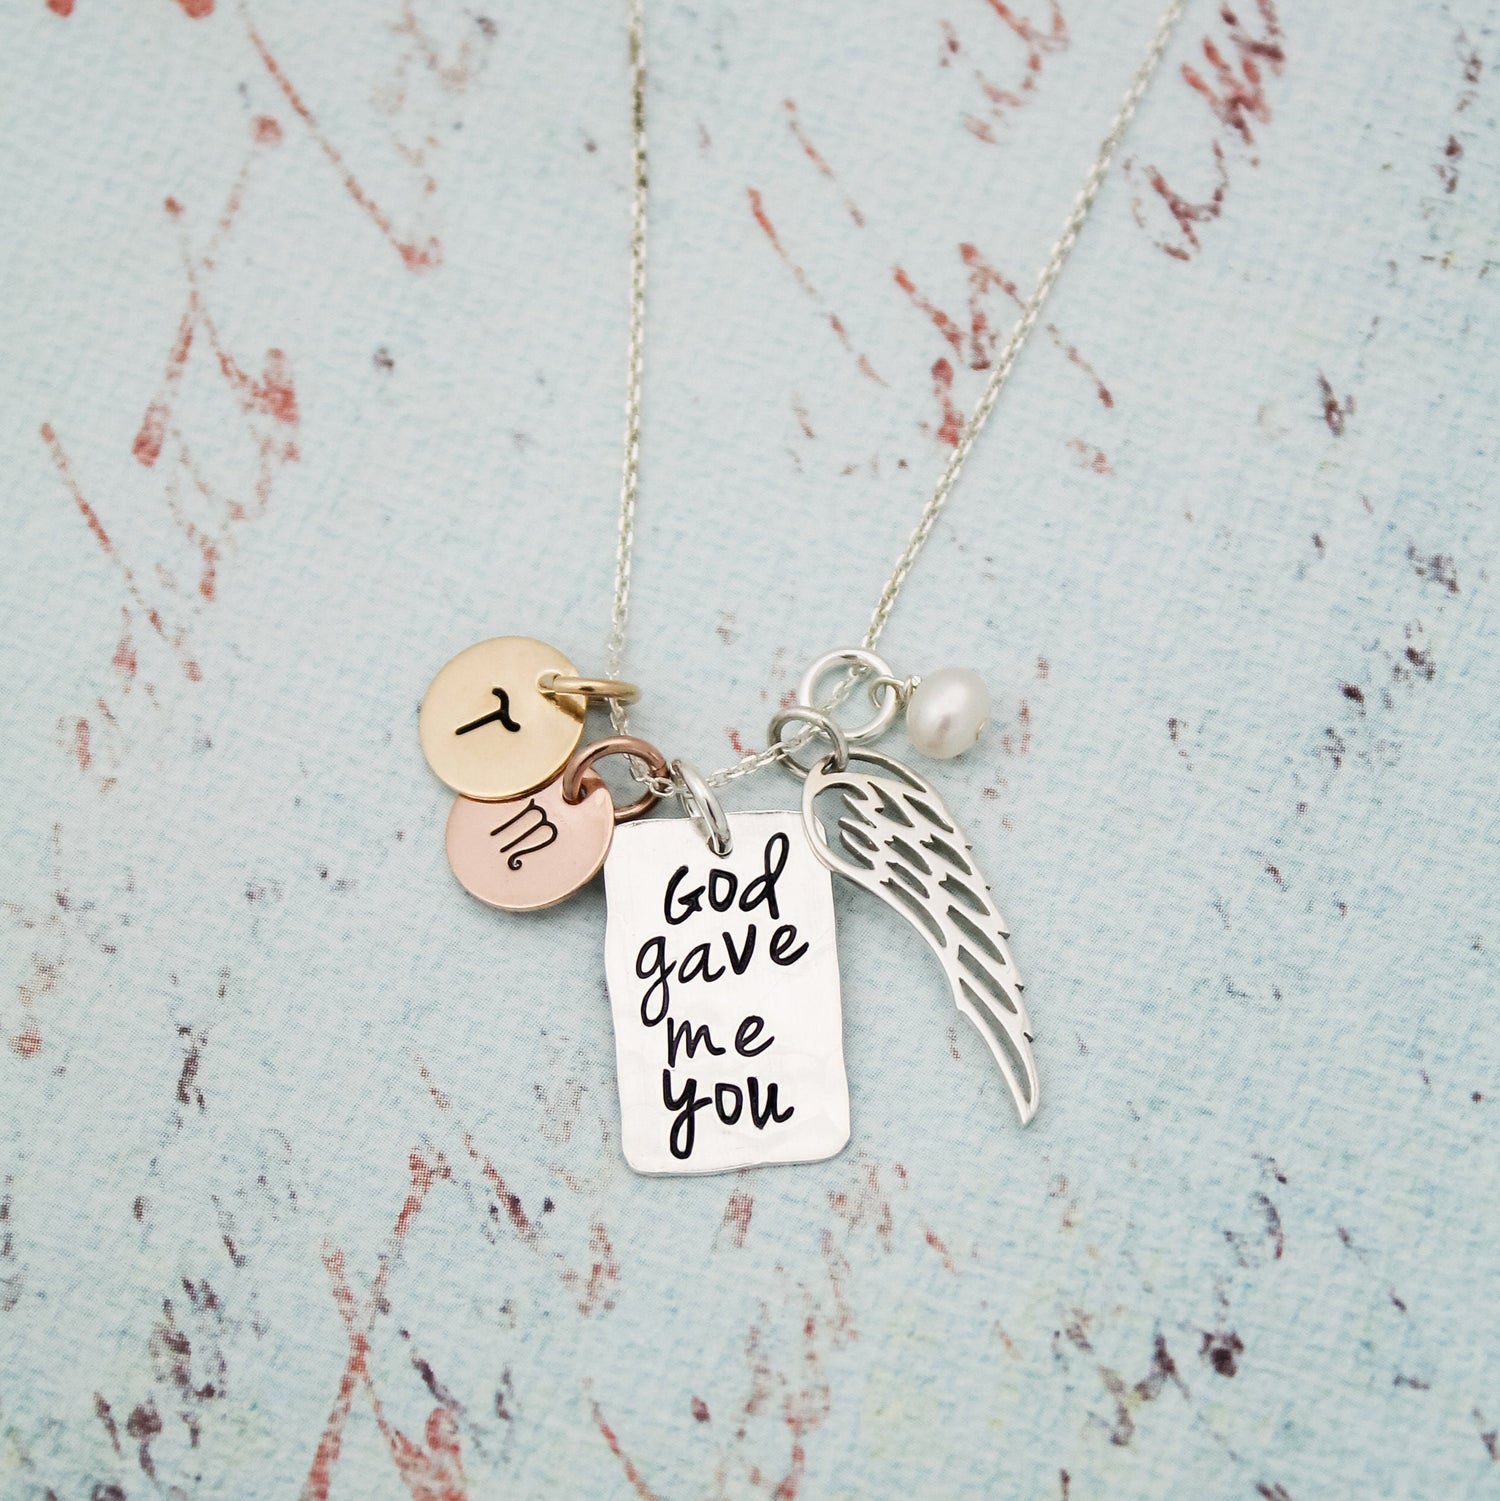 God Gave Me You Necklace, Cross Necklace, Angel Wing Jewelry, Mom Necklace, Mommy Jewelry, Birthstone Necklace, Sterling Silver Hand Stamped